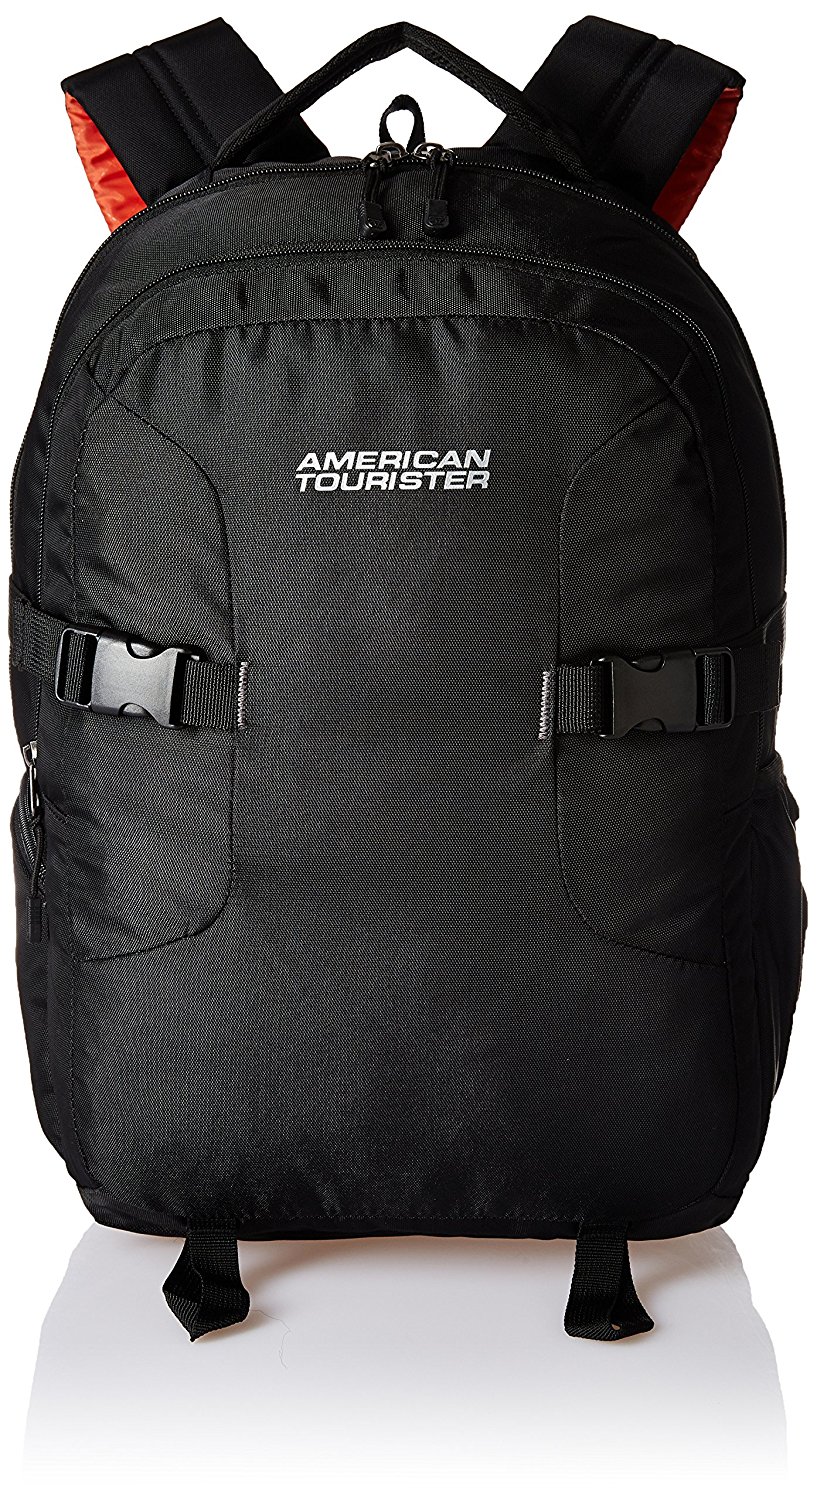 Amazon: American Tourister Polyester 21 Ltrs Black Laptop Backpack at Rs 750